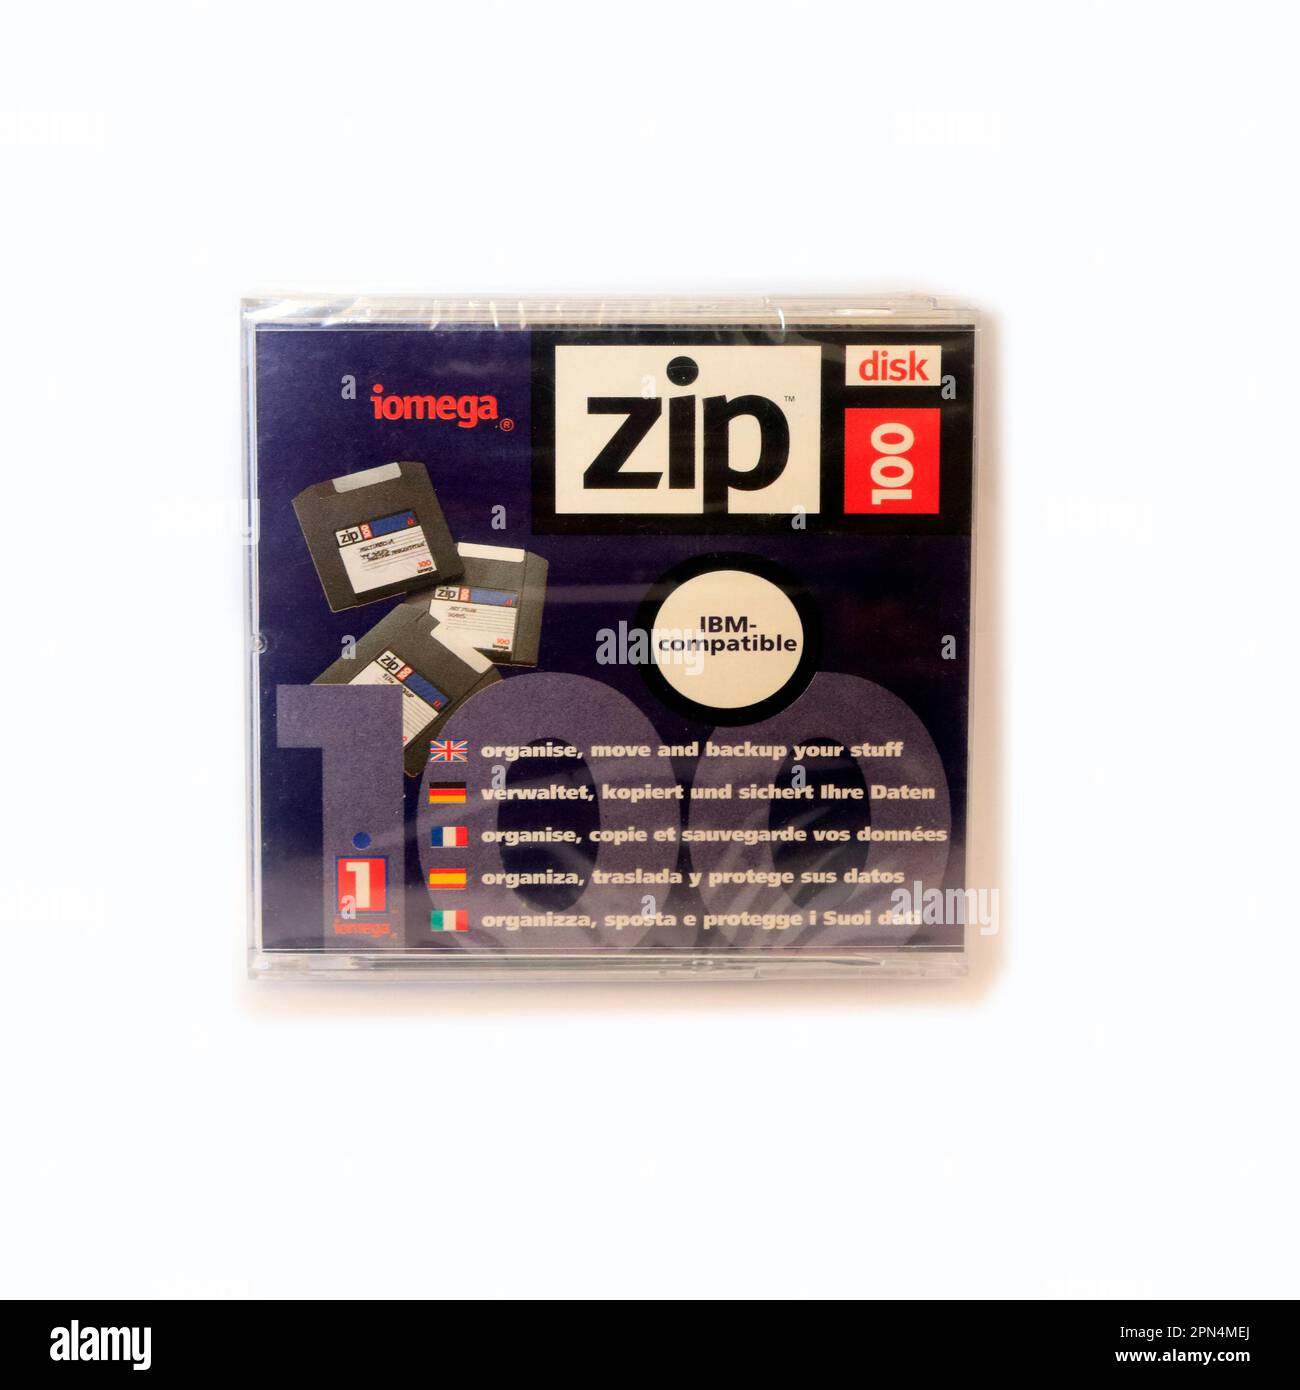 Iomega zip disk / disc. New, still in wrapper. c1990s. cym Stock Photo